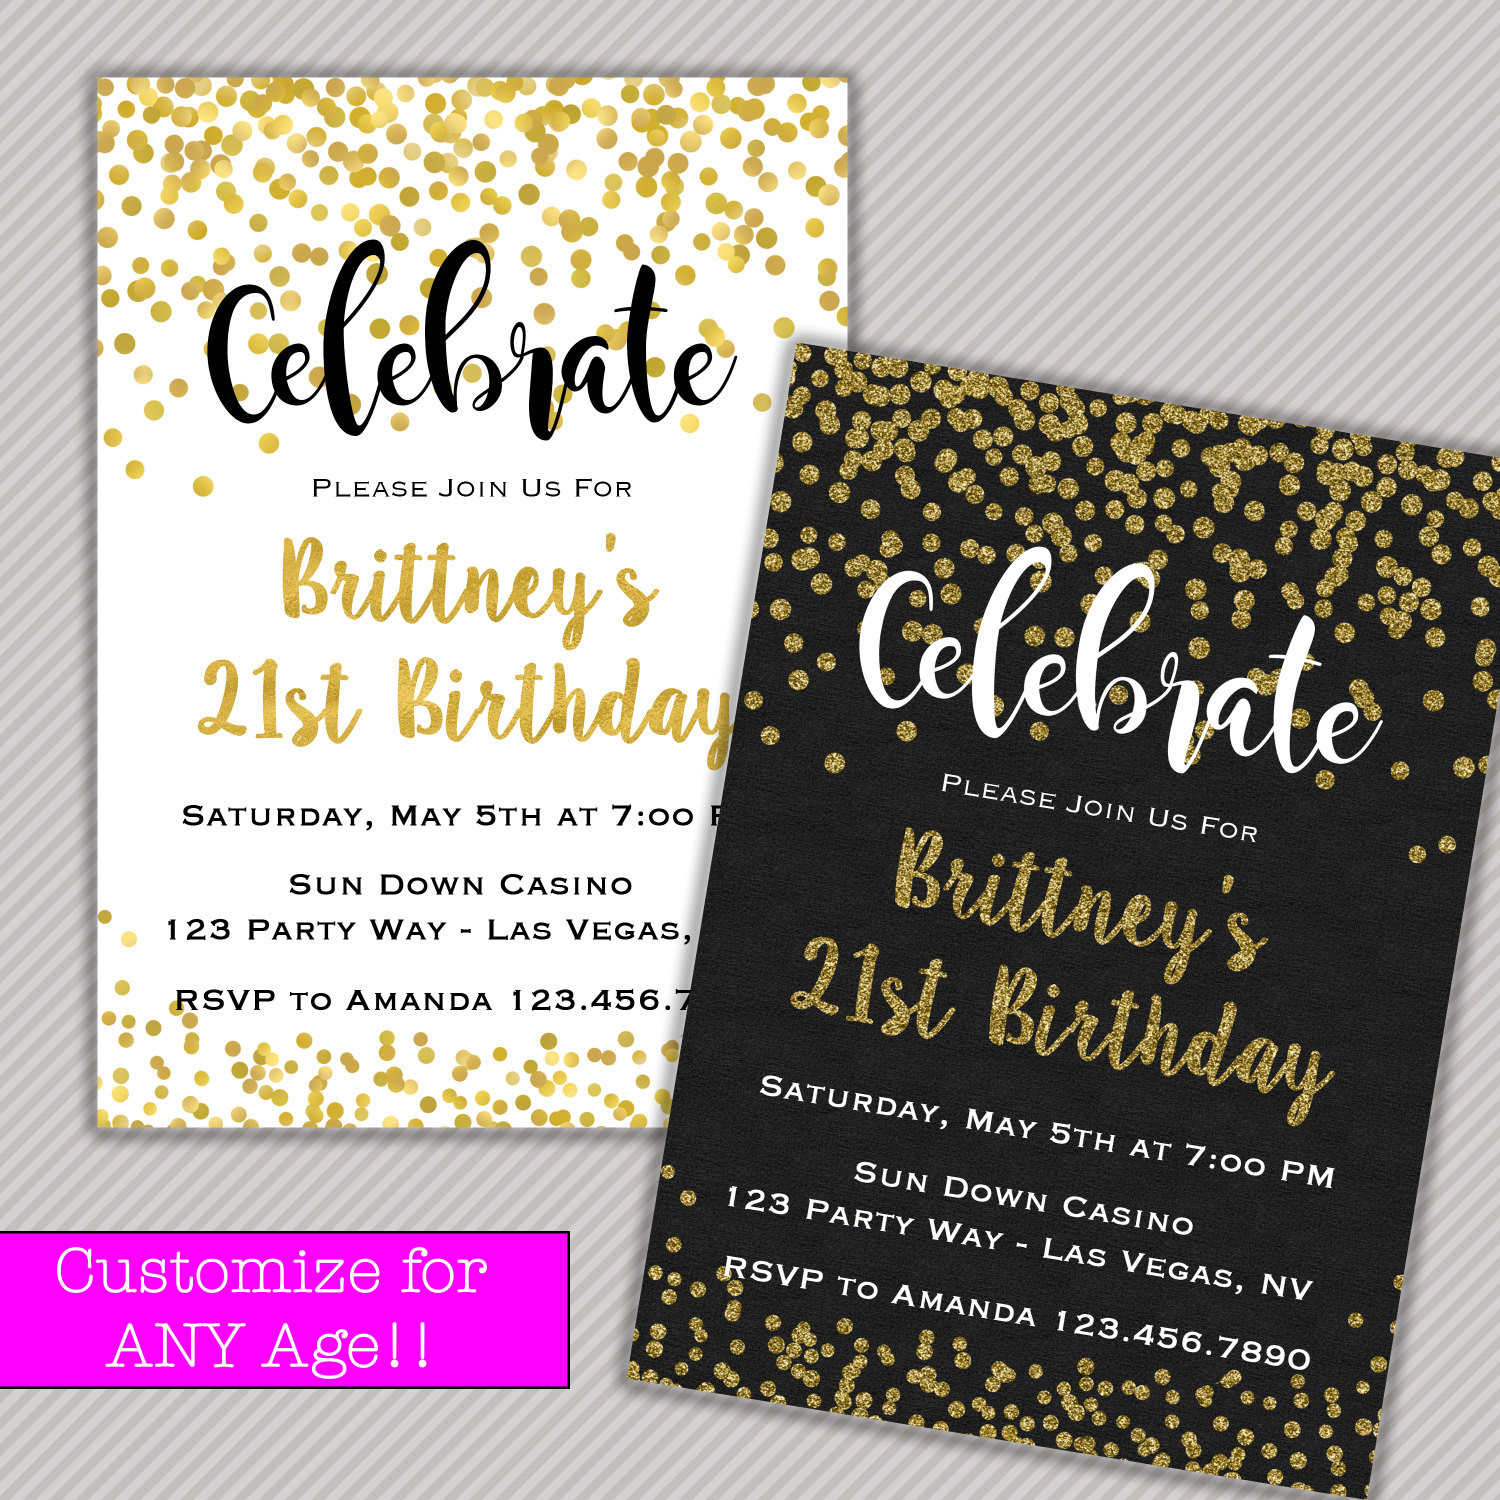 Adult Birthday Invitations
 Adult Birthday Invitation Adult Party by SophisticatedSwan